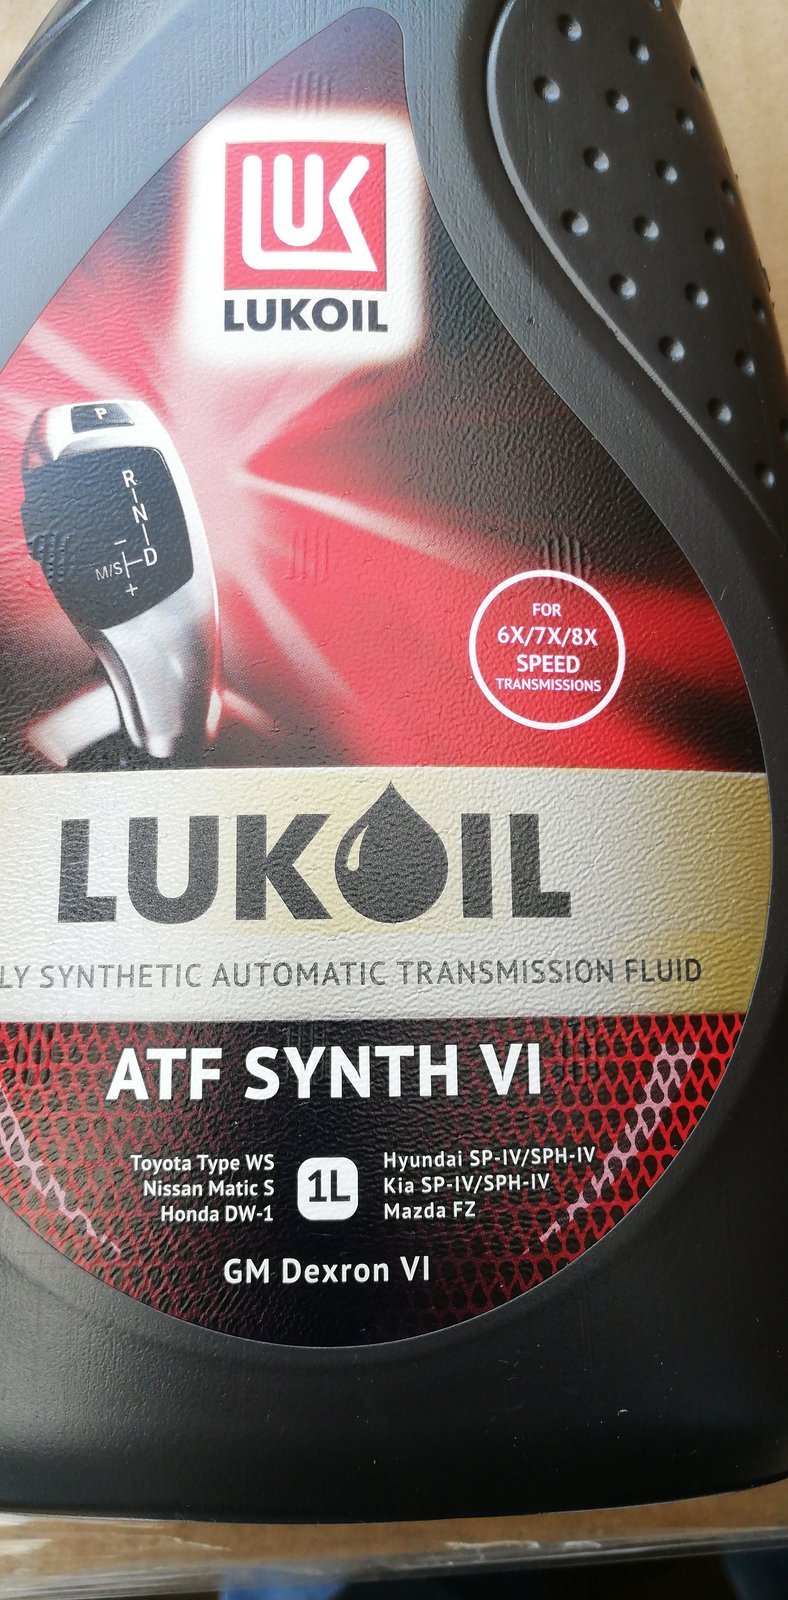 Масло лукойл atf synth. 3141993 Лукойл ATF Synth vi. Лукойл ATF Synth vi. ATF 6 Lukoil. ATF Dextron 6 Лукойл.